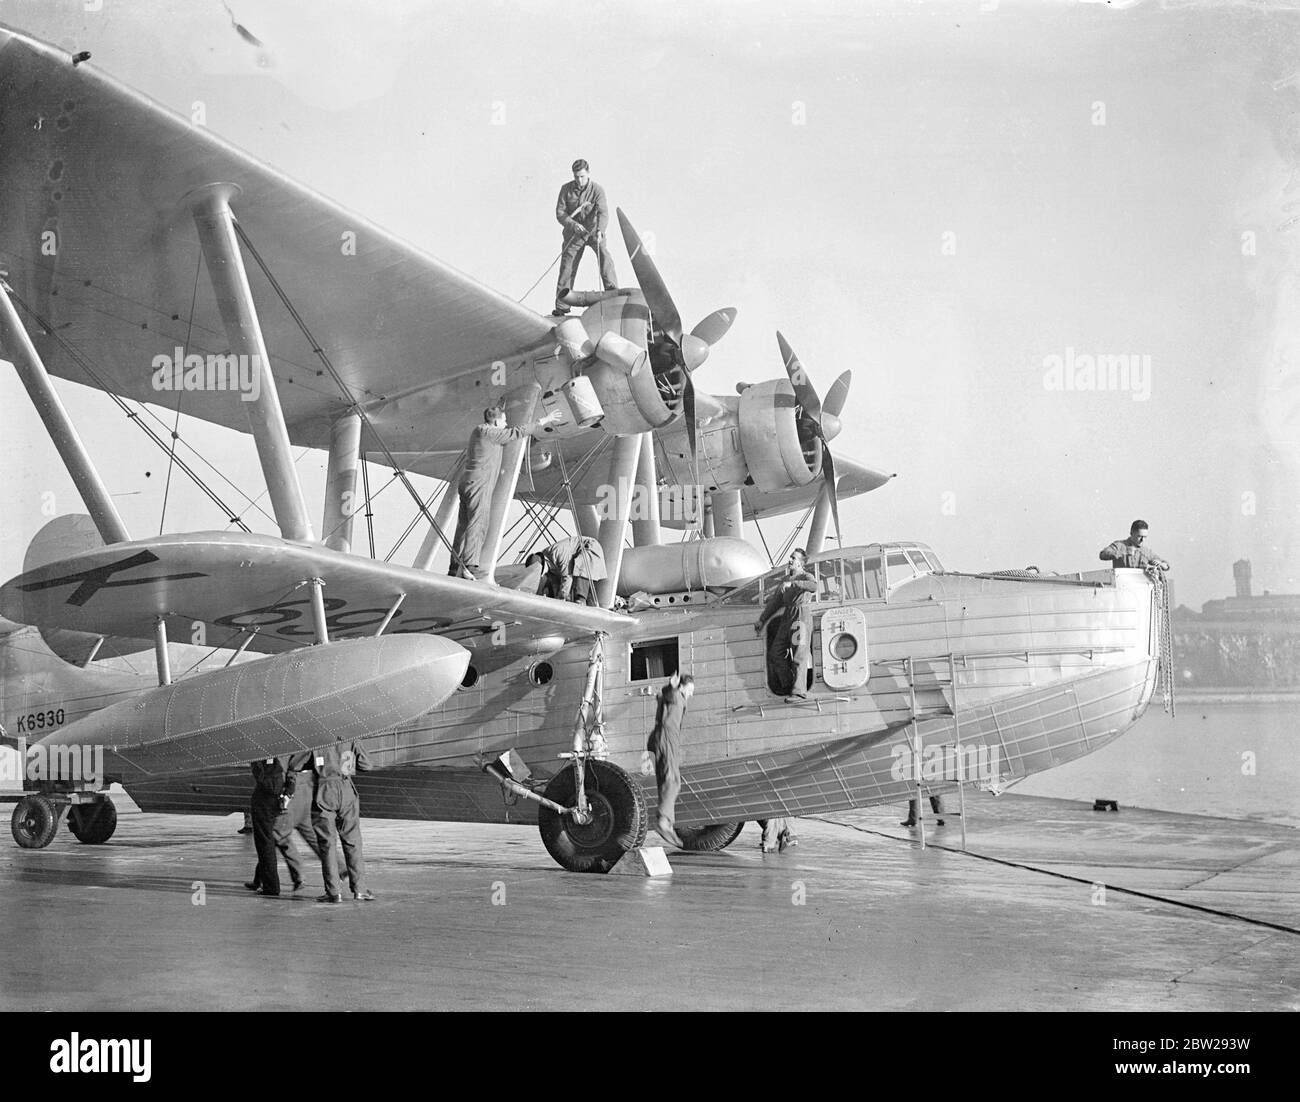 The longest formation flight ever undertaken by service unit, five RAF Saro London flying boats of number 204 (Gen reconnaissance) Squadron being prepared at Plymouth. They will take off next week and by the time I return in the Spring, they would have flown 25,000 miles to Australia and back. The visit is being made in connection with the 150th anniversary celebration of Sydney. Photo shows, refuelling one of the flying boats at Plymouth. 26 November 1937 Stock Photo